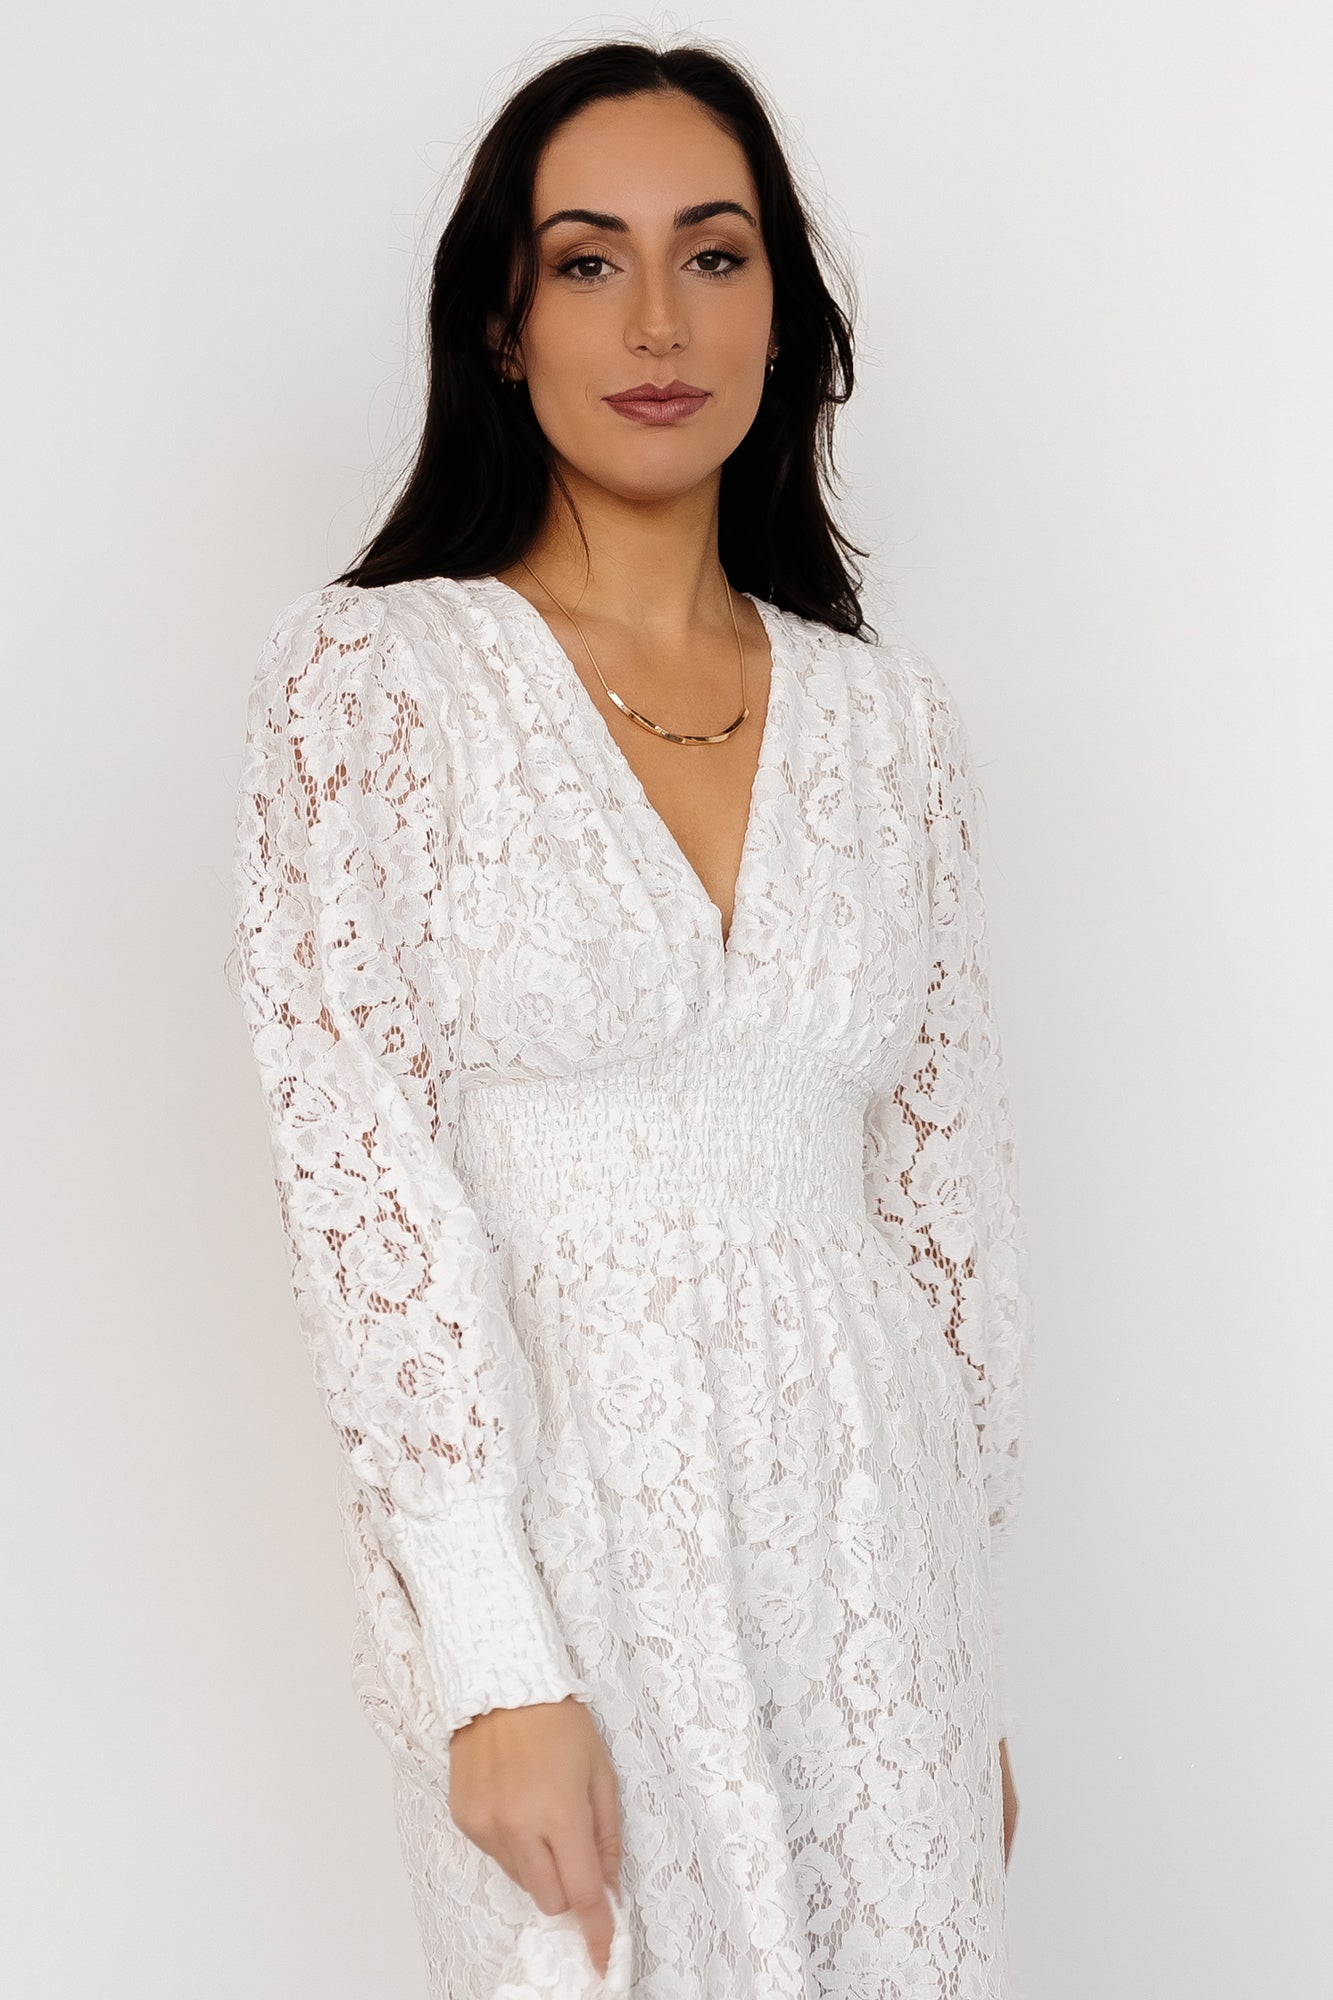 All I Know White Lace Long Sleeve Maxi Dress